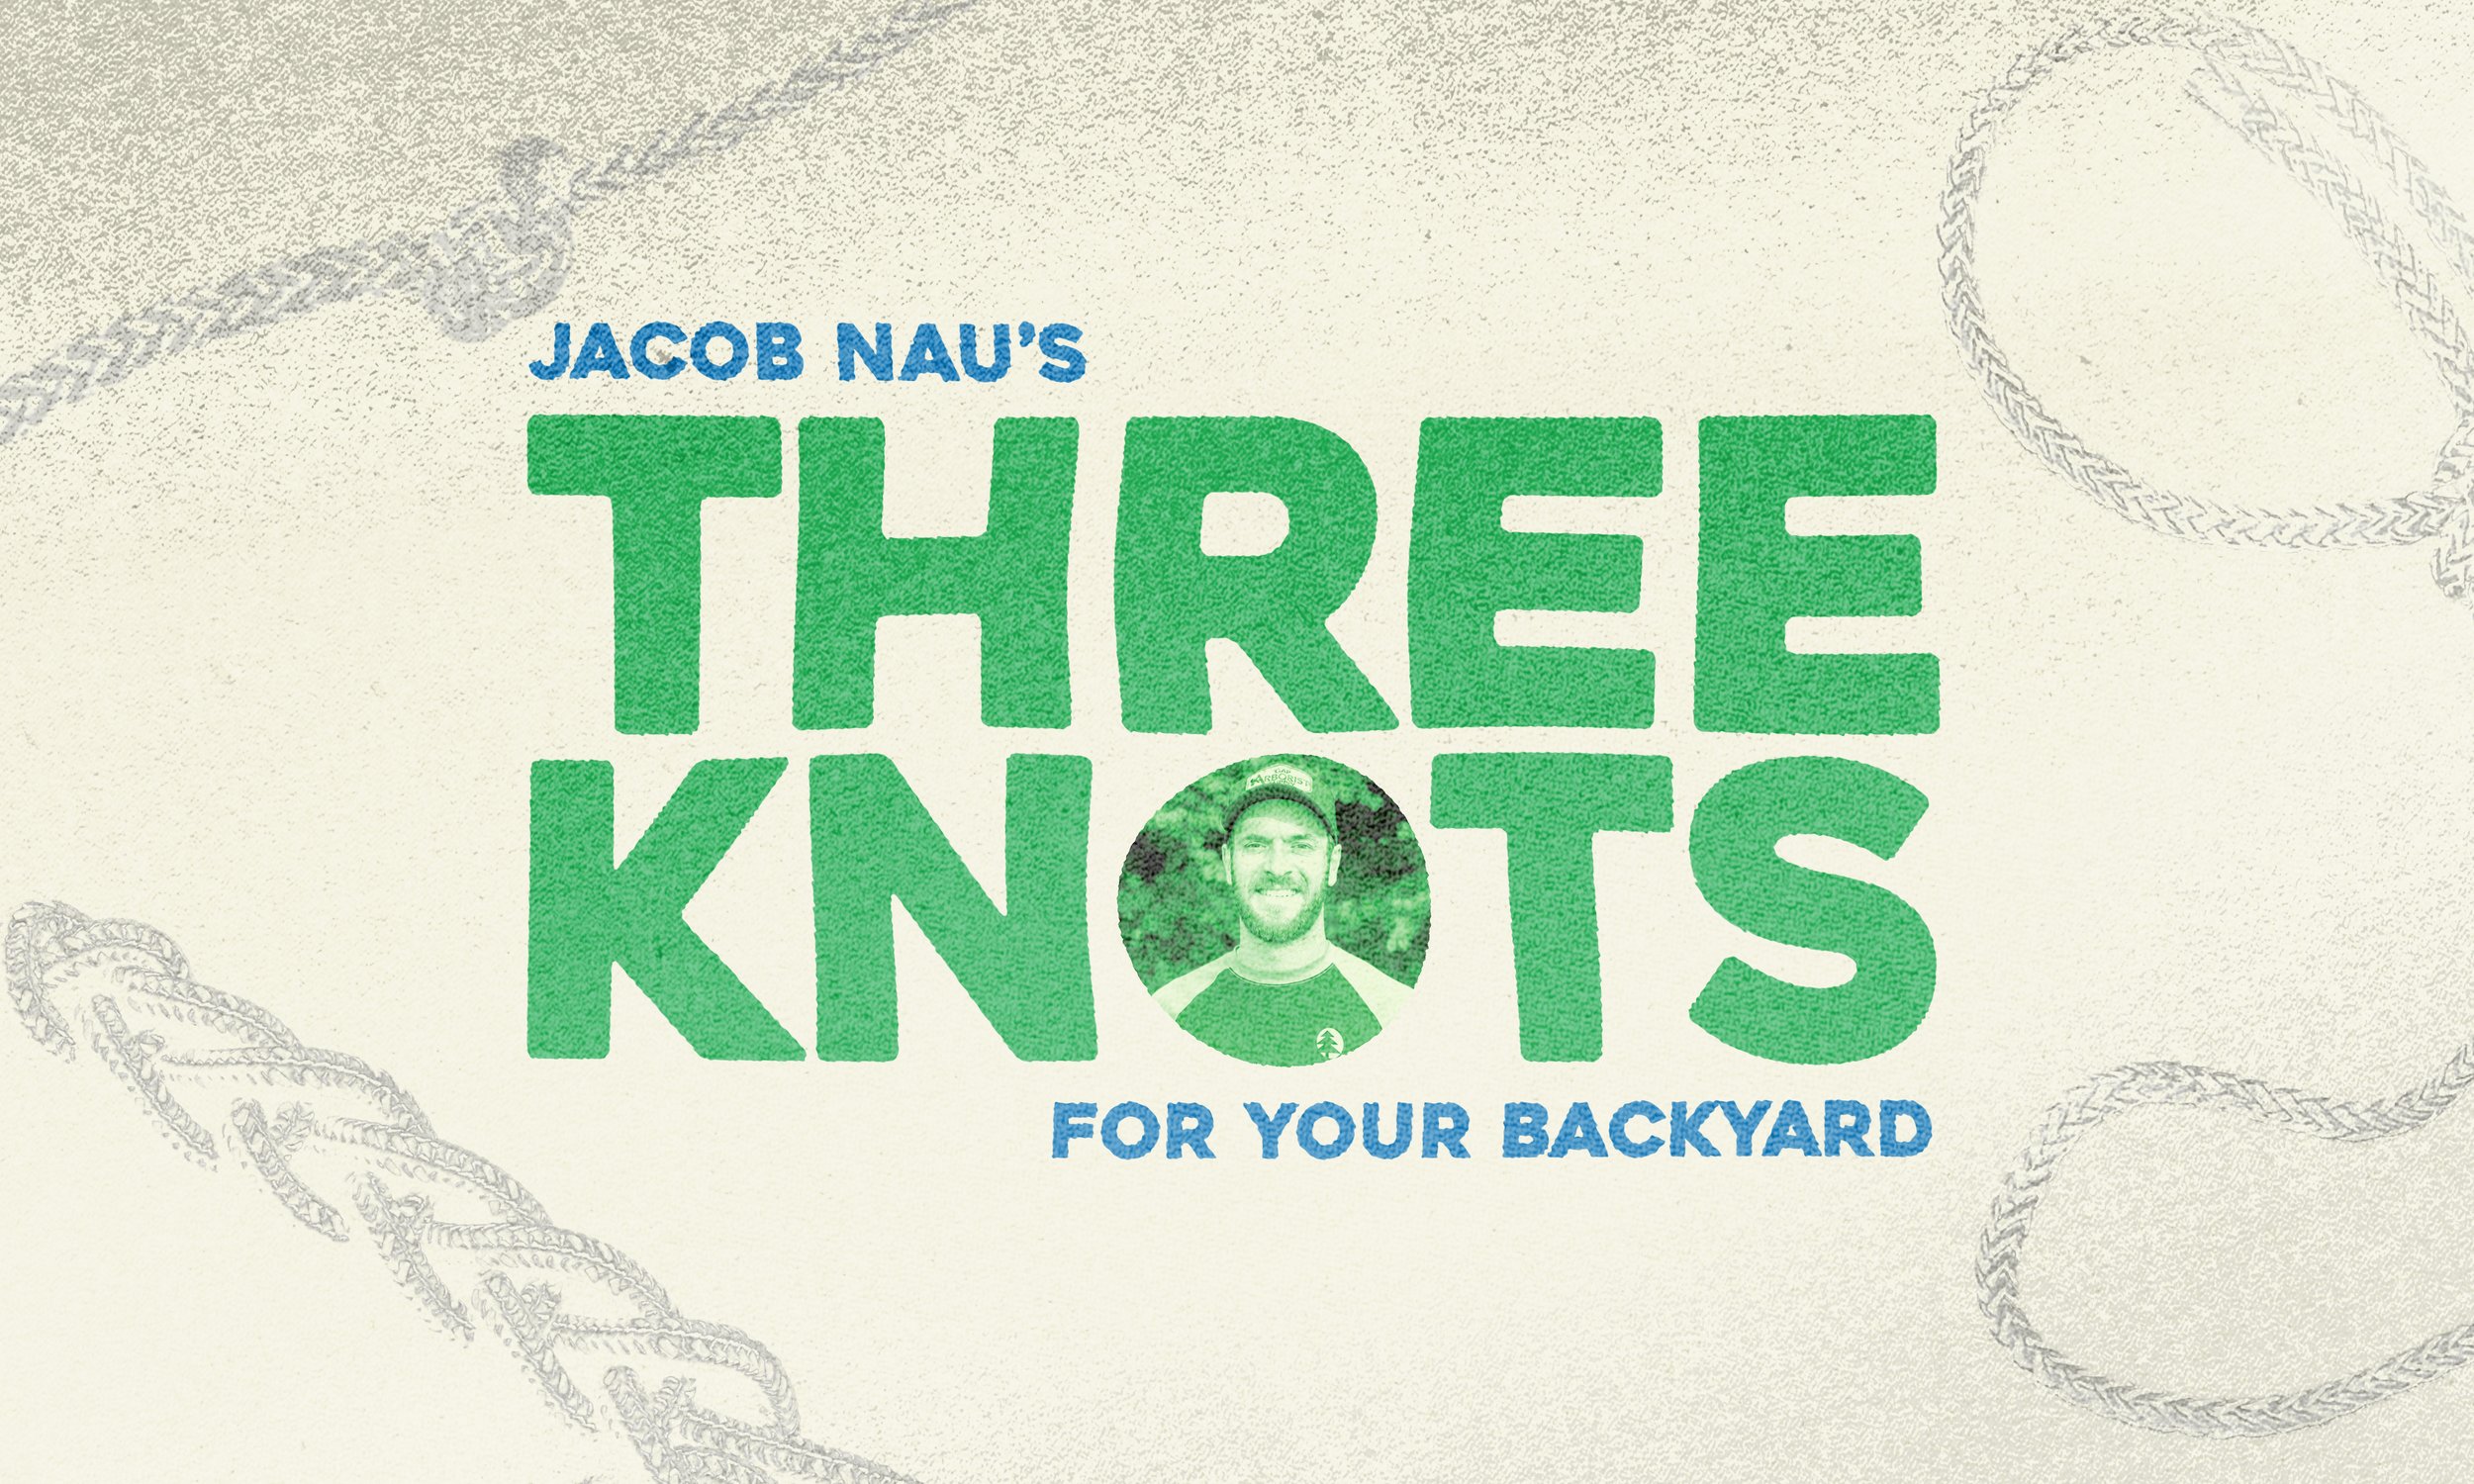 Russell Tree Experts — 3 Knots for Your Backyard!